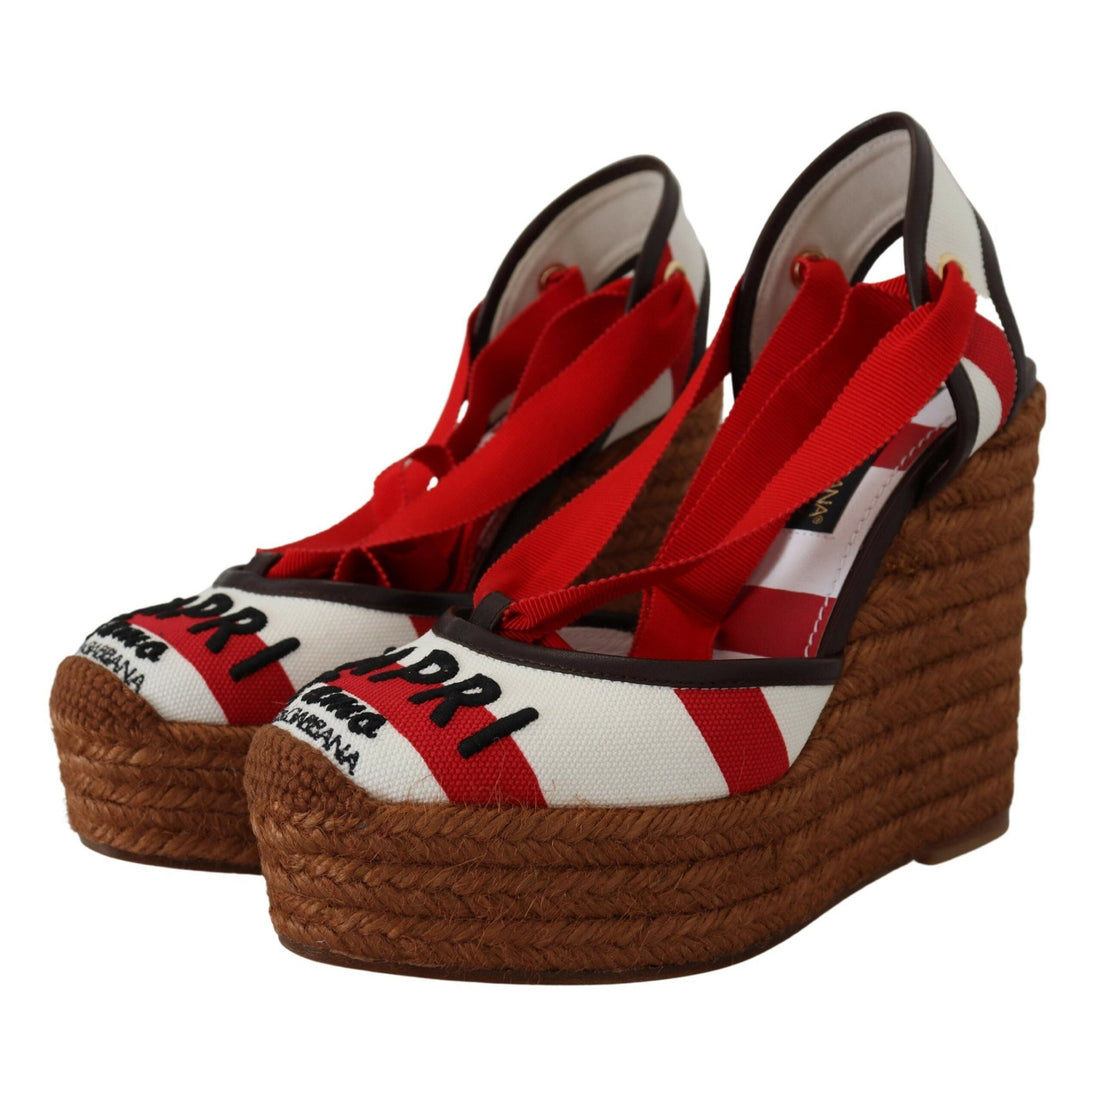 Dolce & Gabbana Multicolor Lace-Up Wedge Sandals